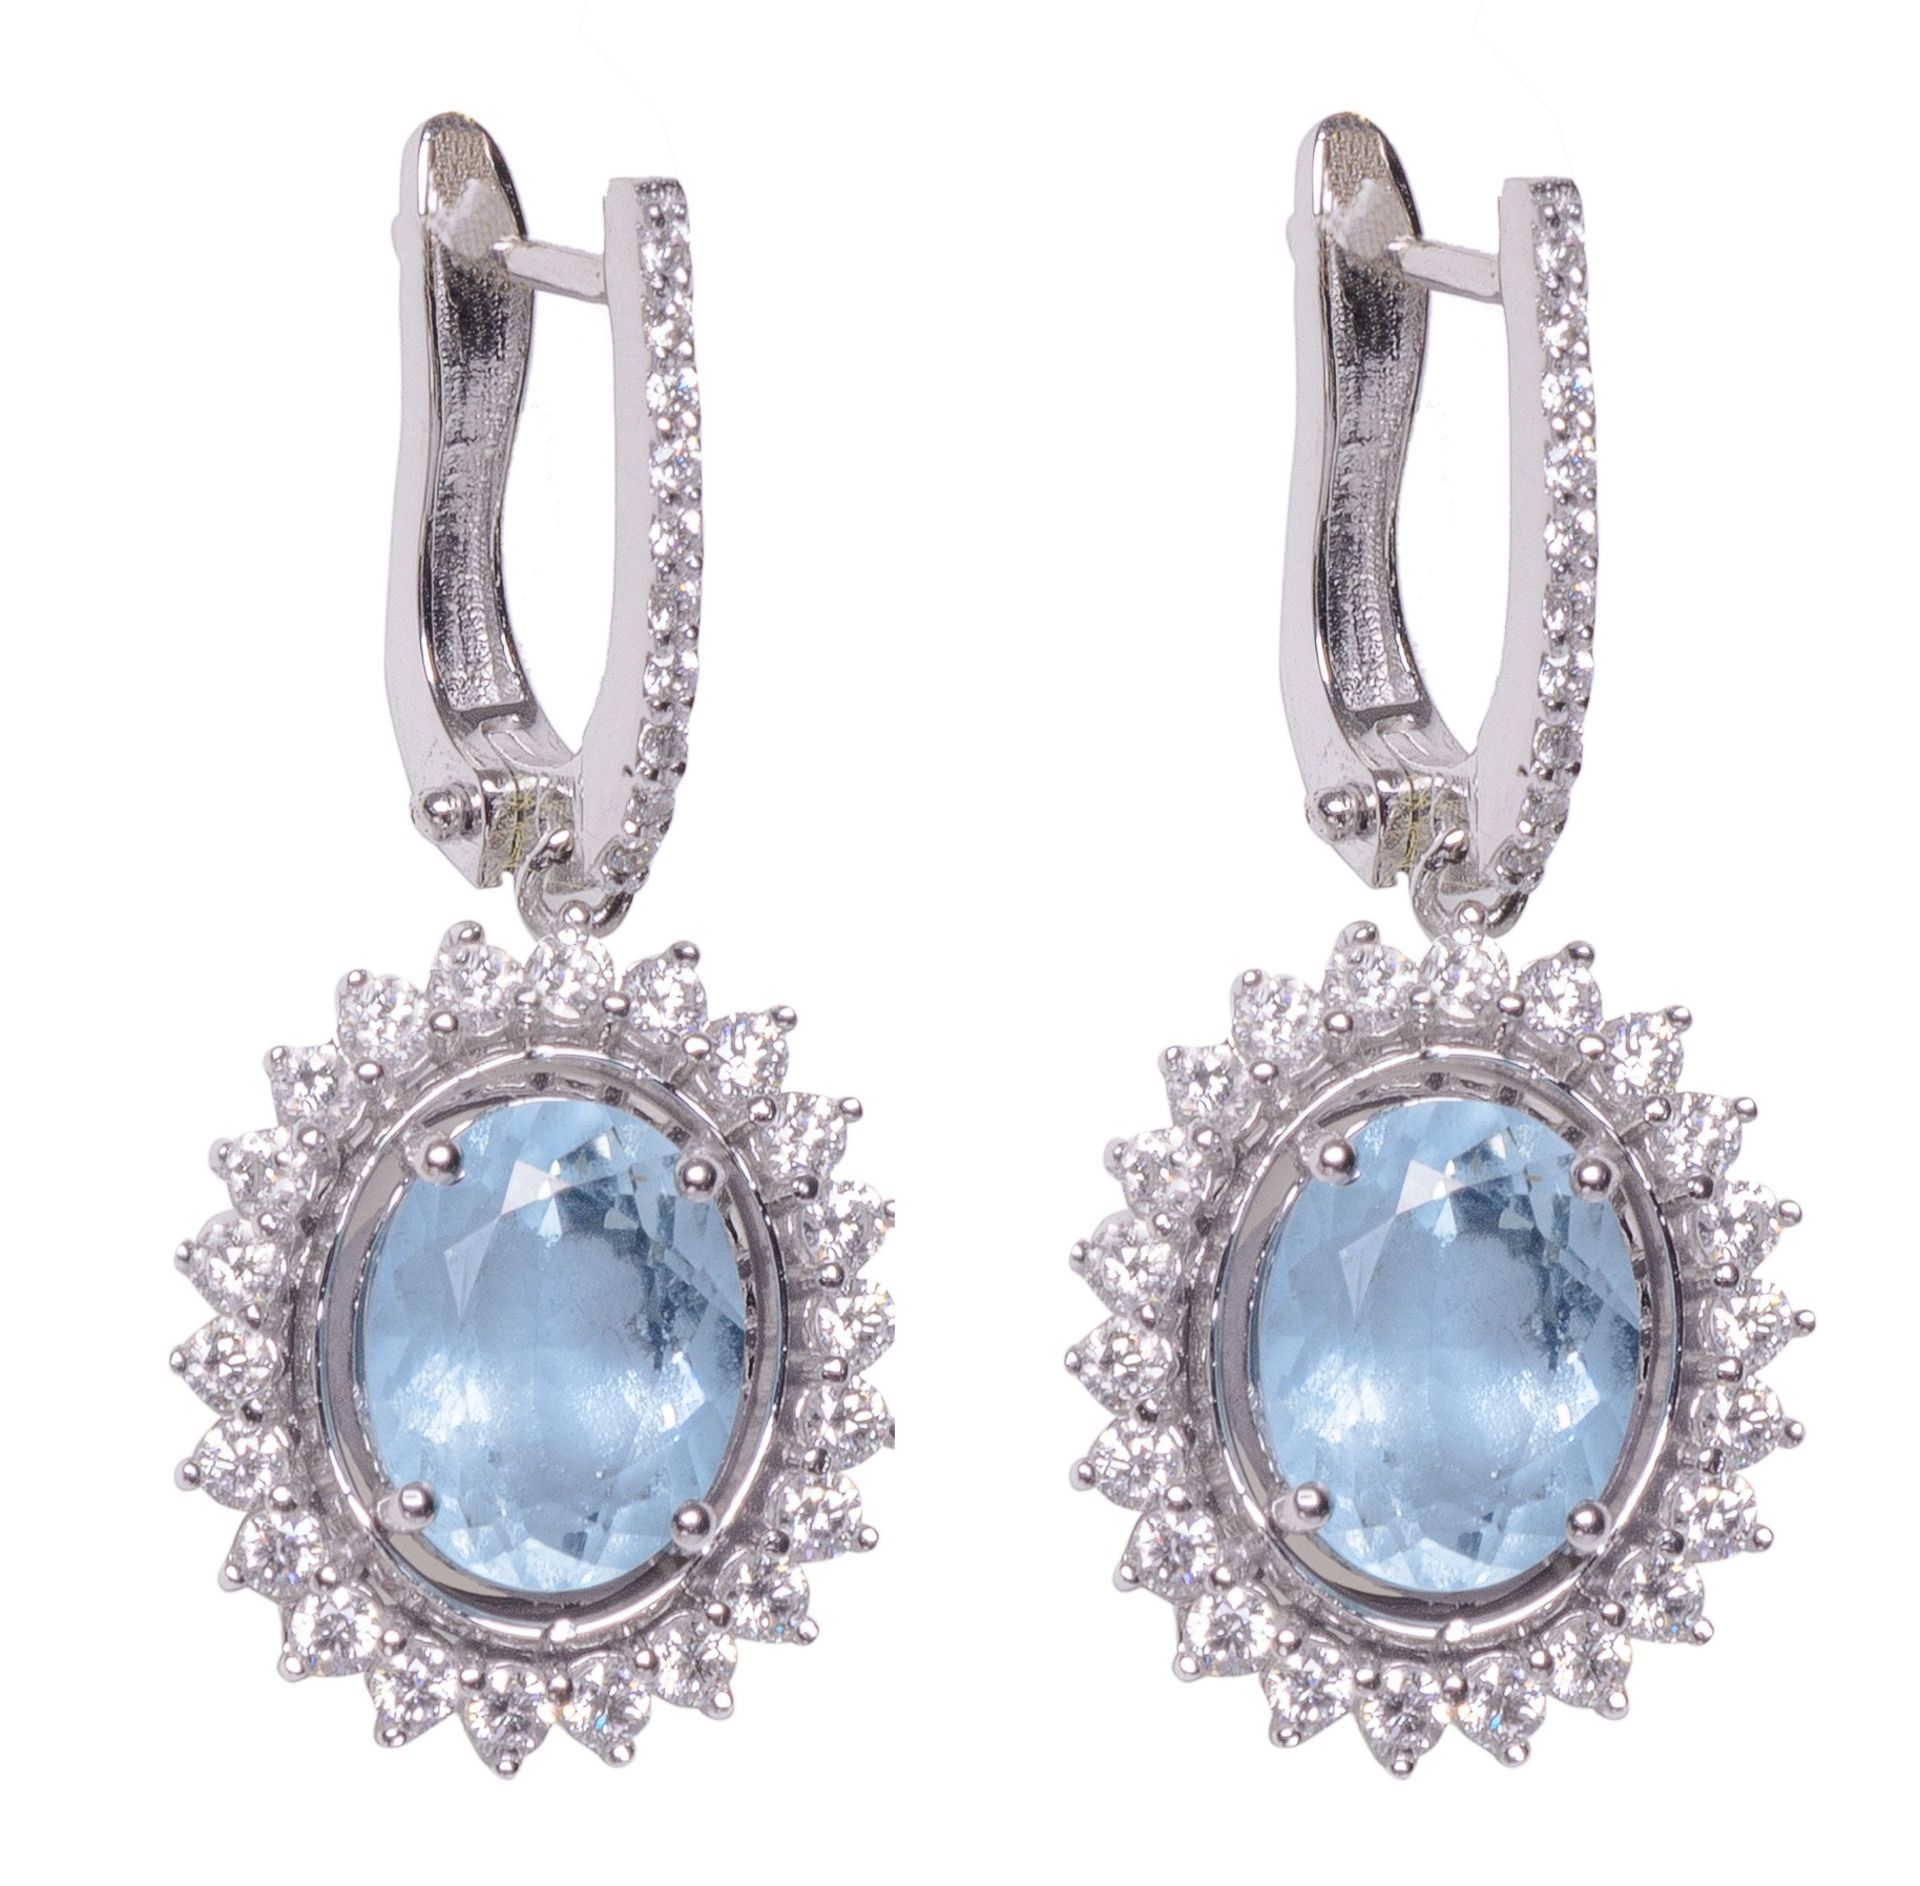 A pair of 18ct white gold earrings set with aquamarine and 64 brilliant-cut diamonds, total weight: